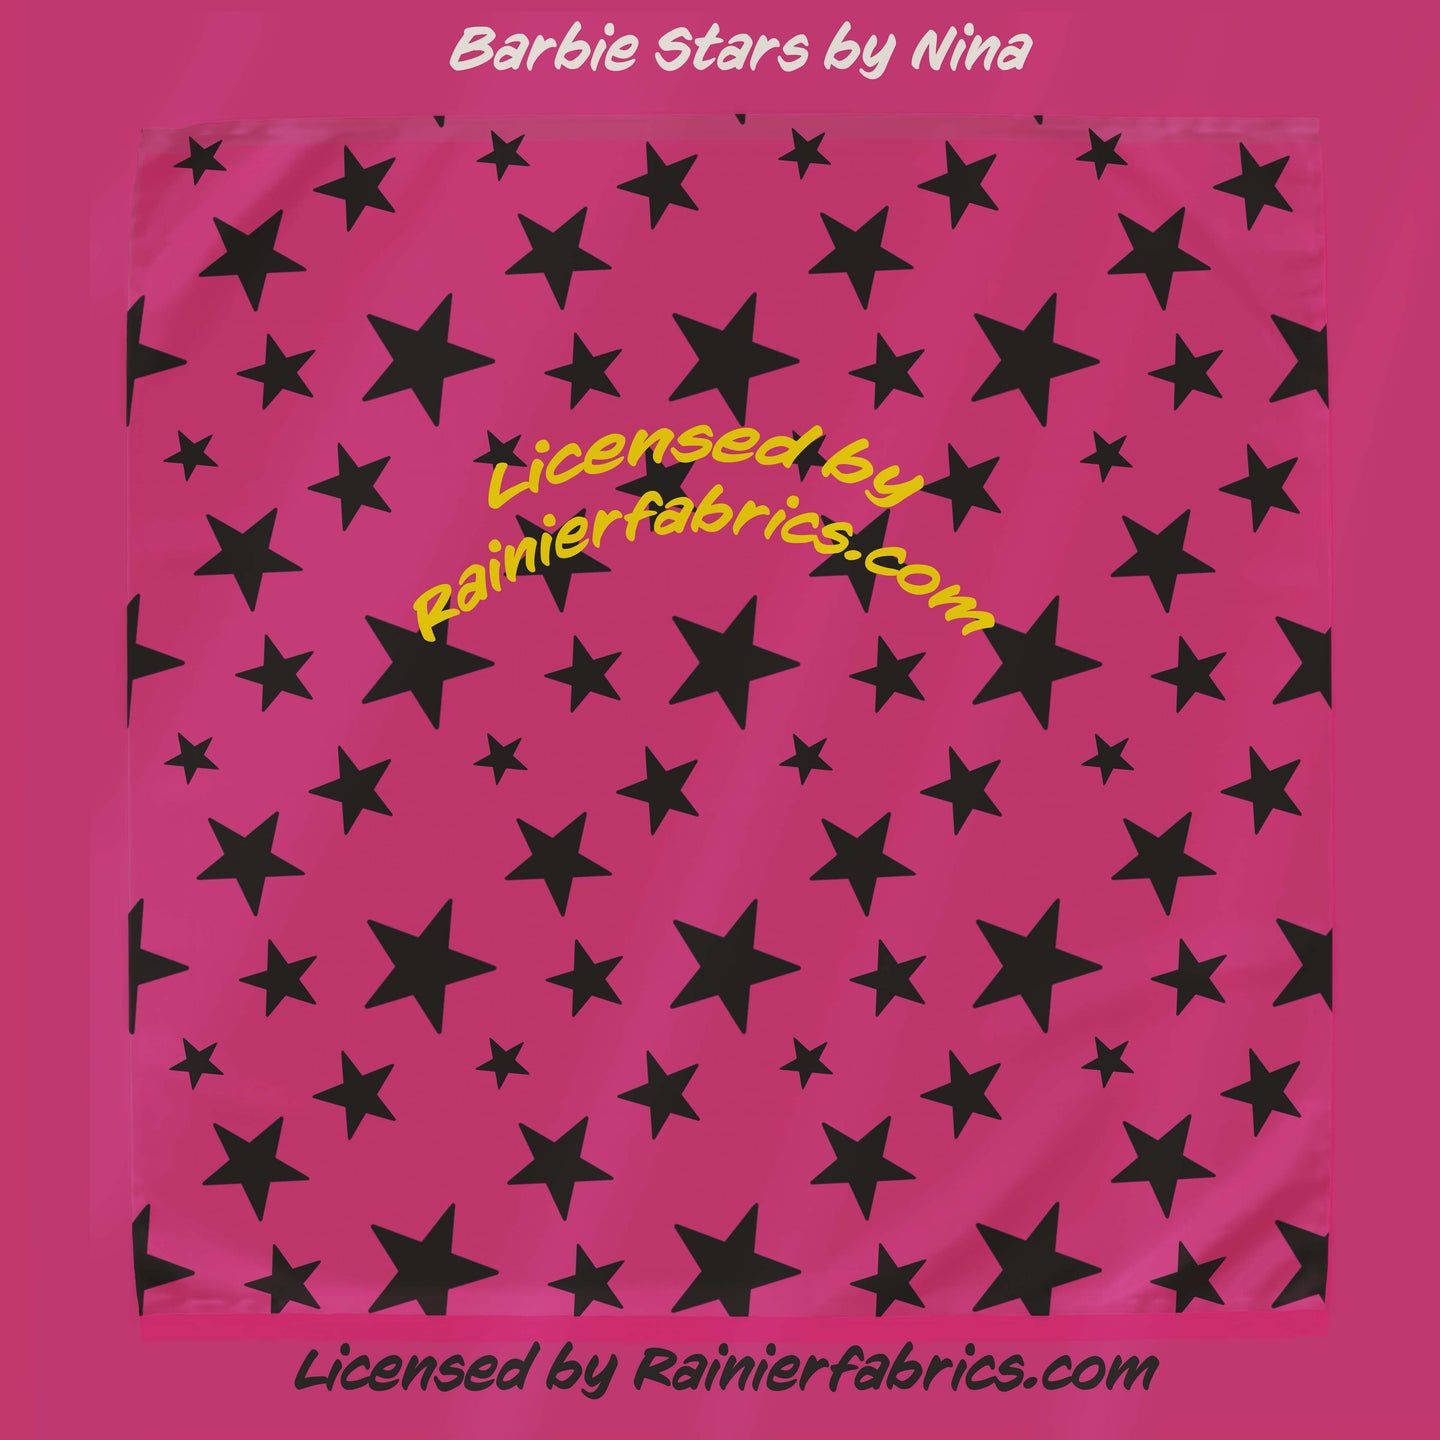 Barbie Stars in Pink by Nina - Rainier Fabrics Exclusive!!! - 3-5 day TAT - Order by 1/2 yard; Blankets and towels available too